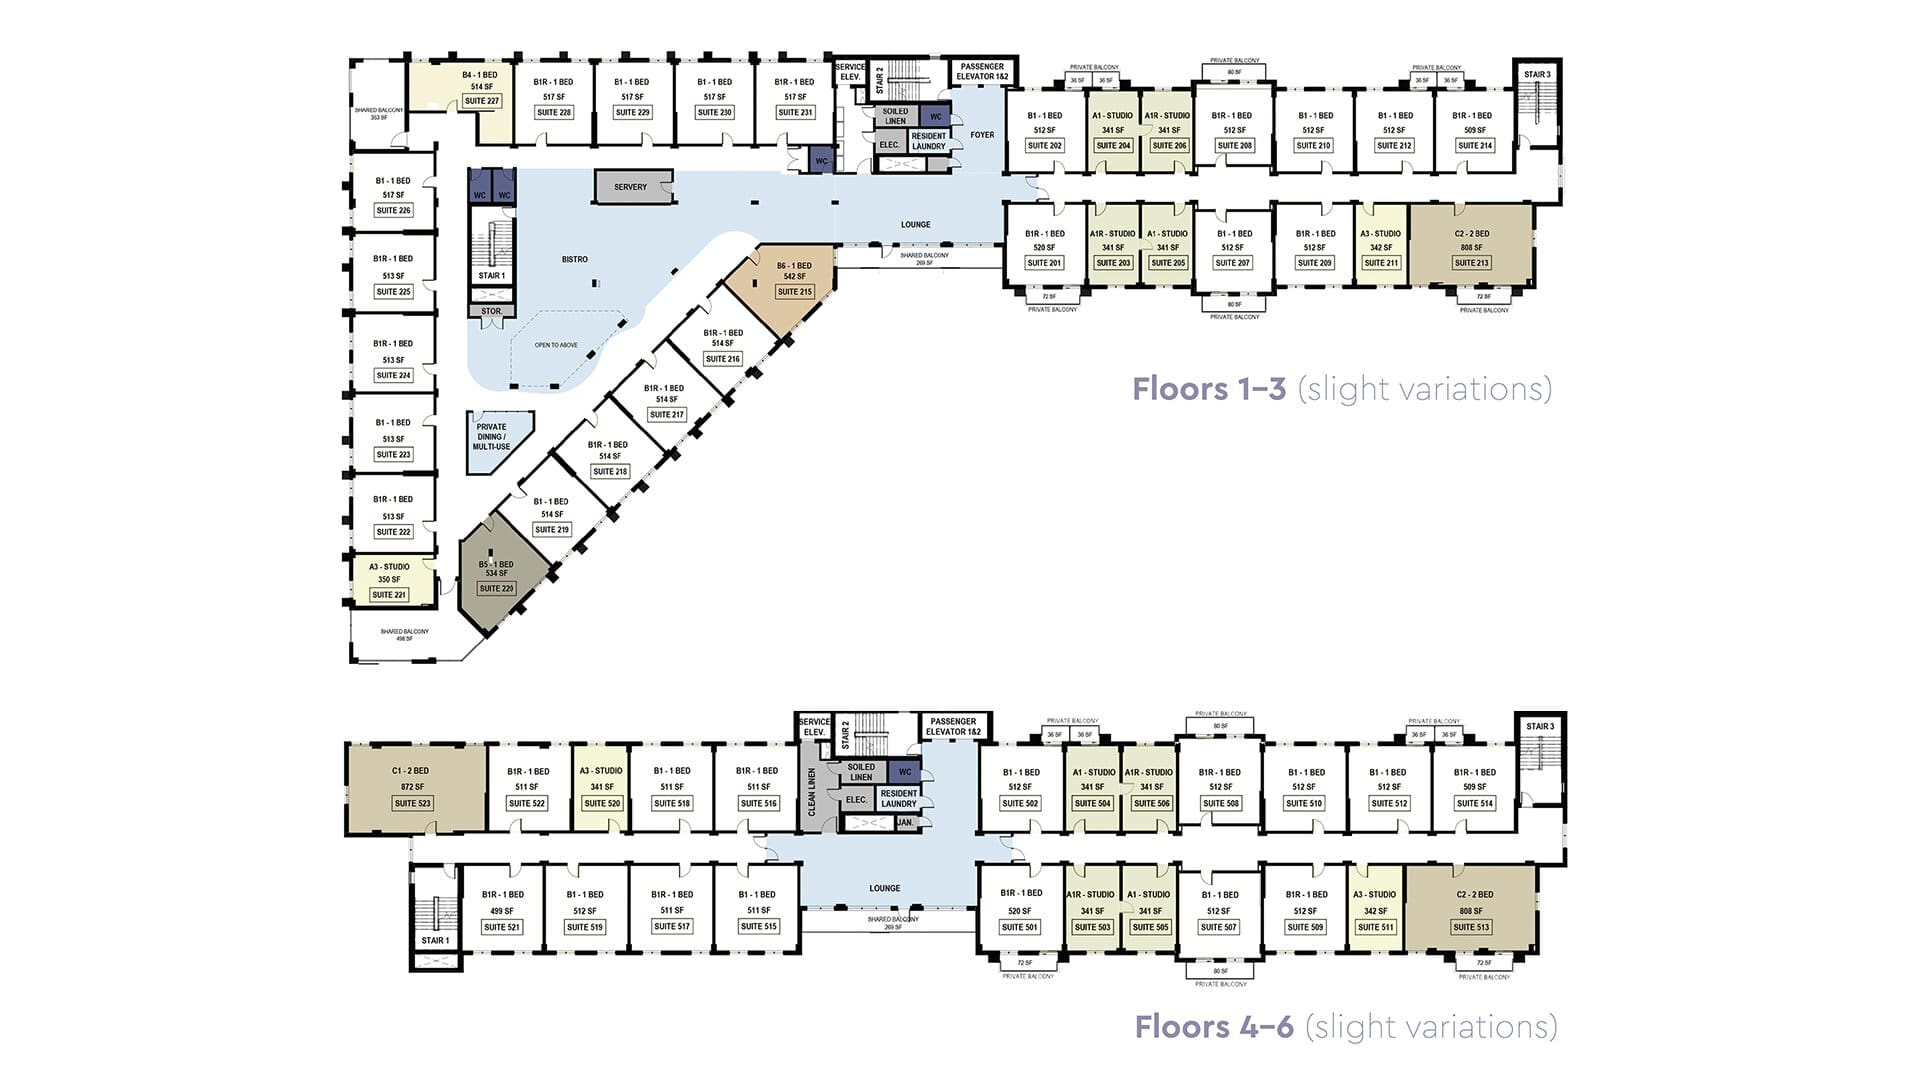 A floorplan view of the six floors of Aster Gardens